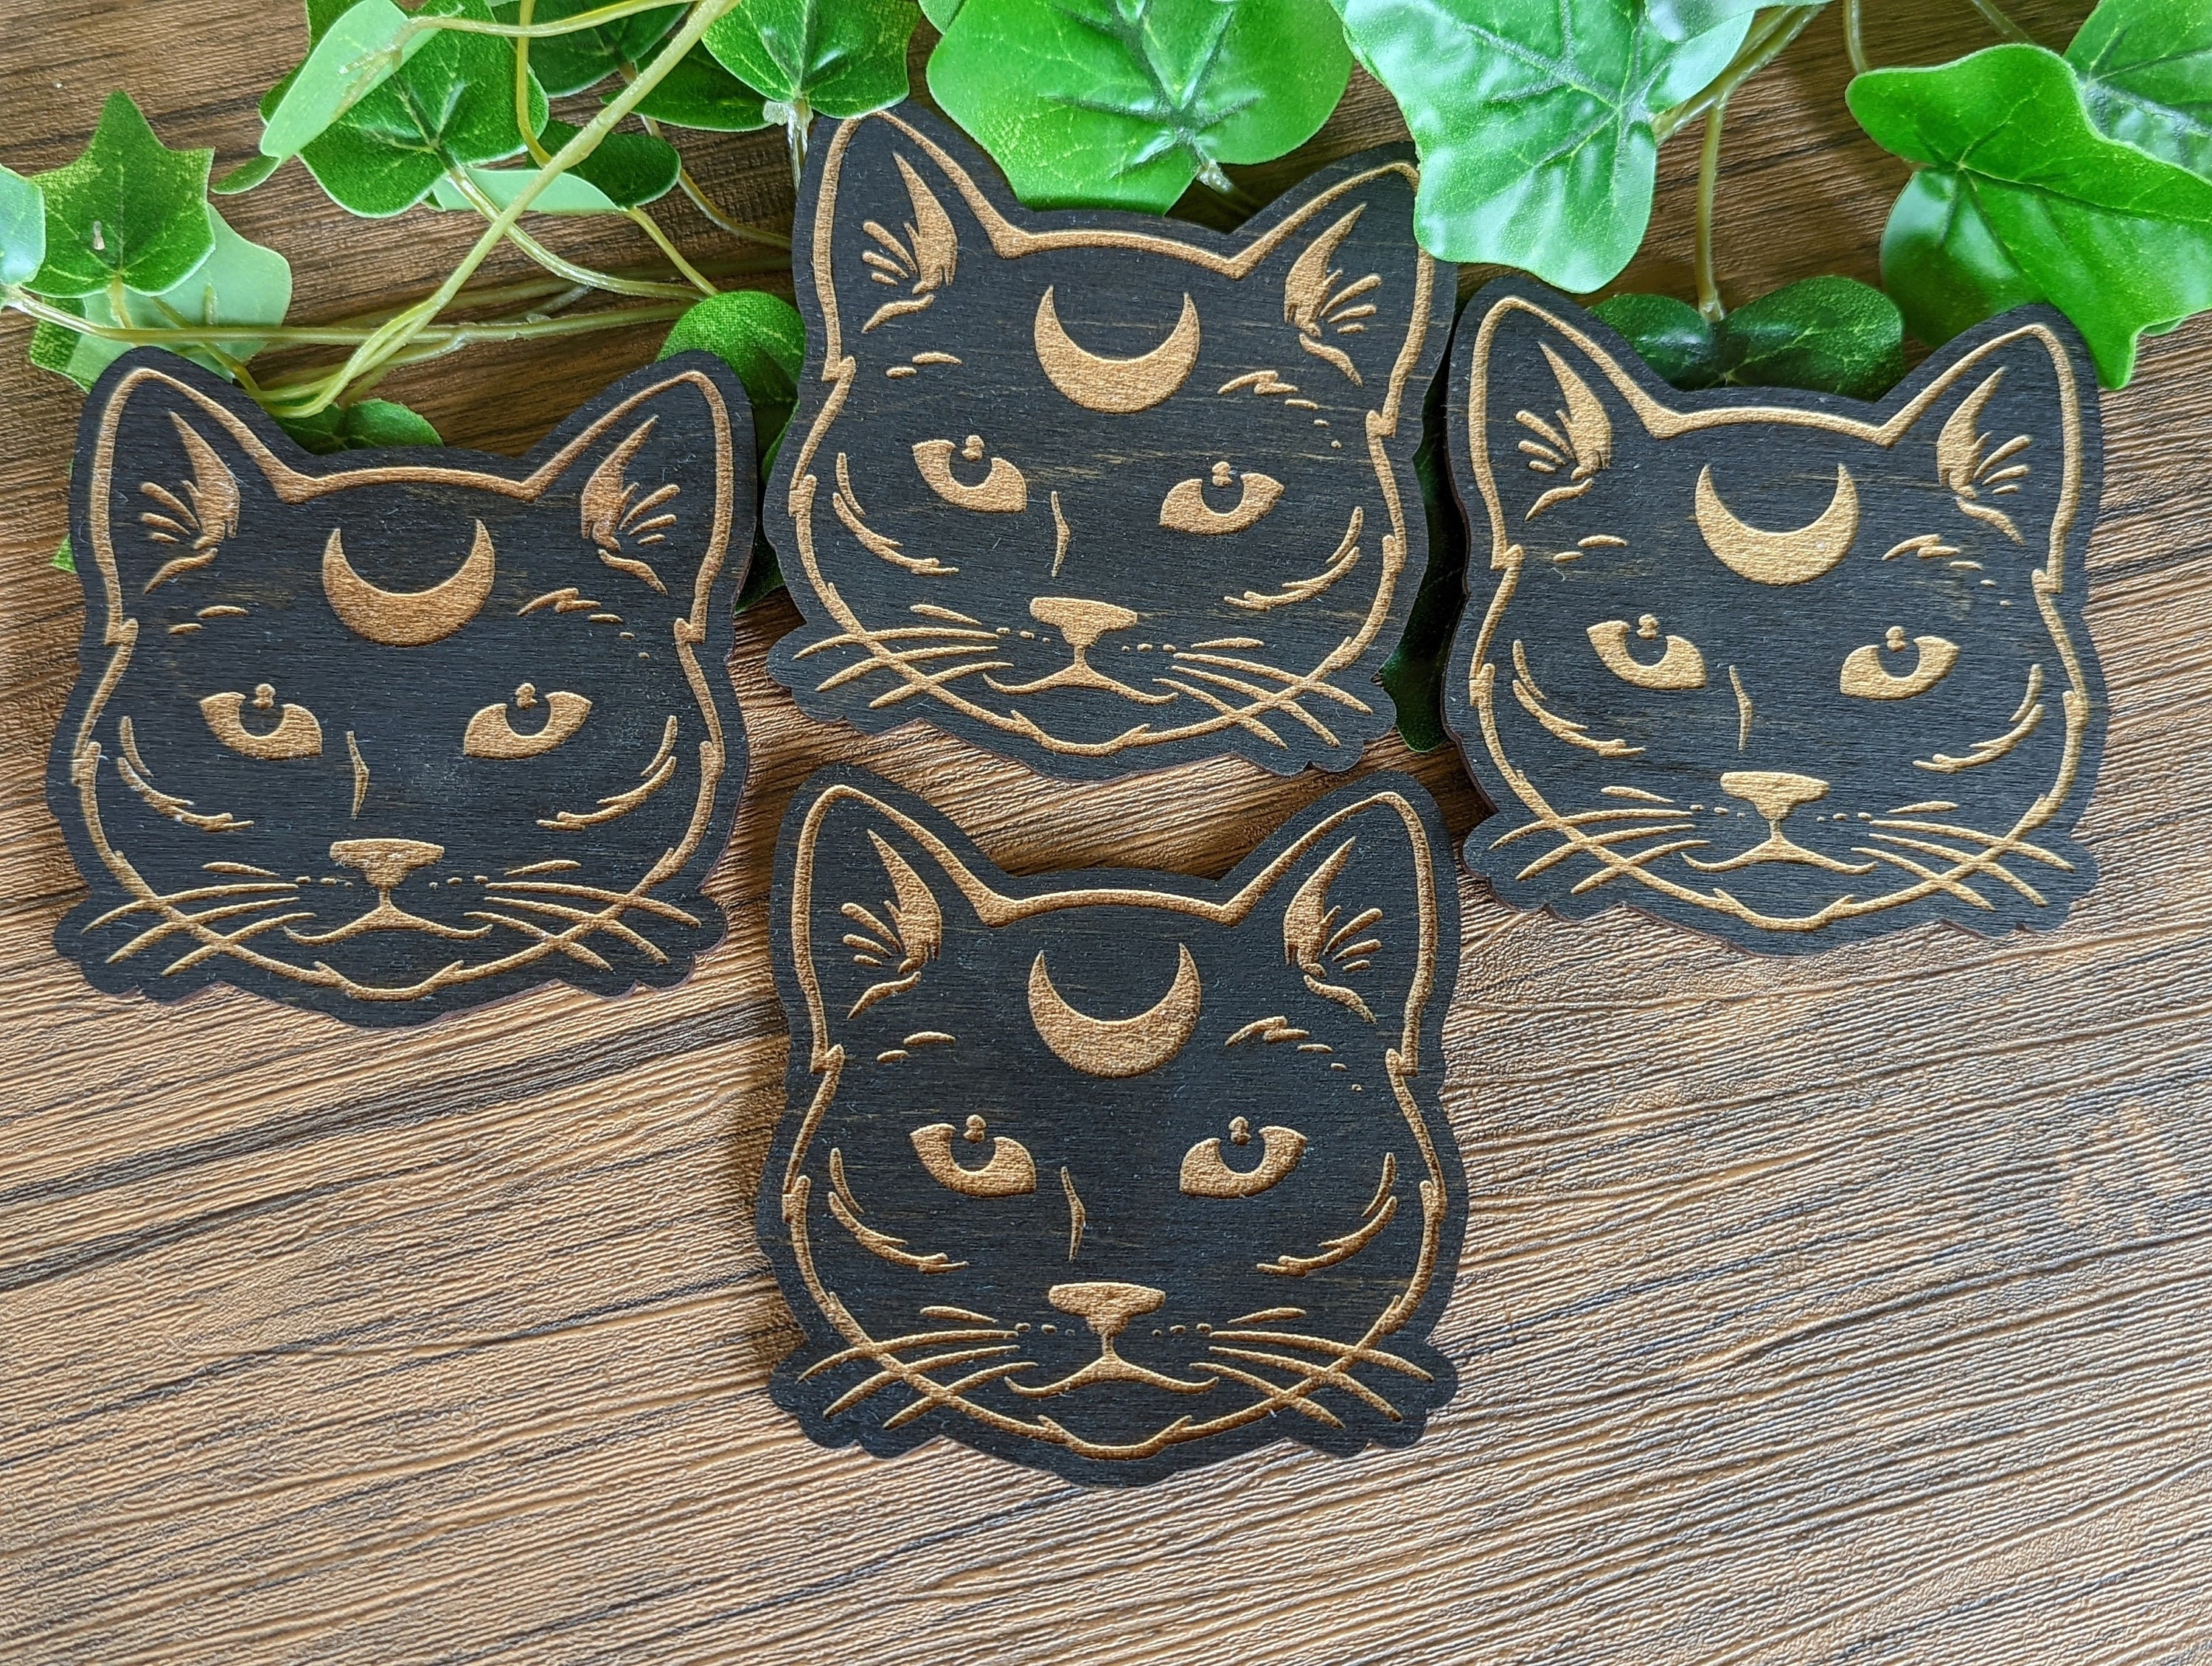 Kitchen Accessory Black Cat Wooden Coasters Housewarming Gifts Set of 4 